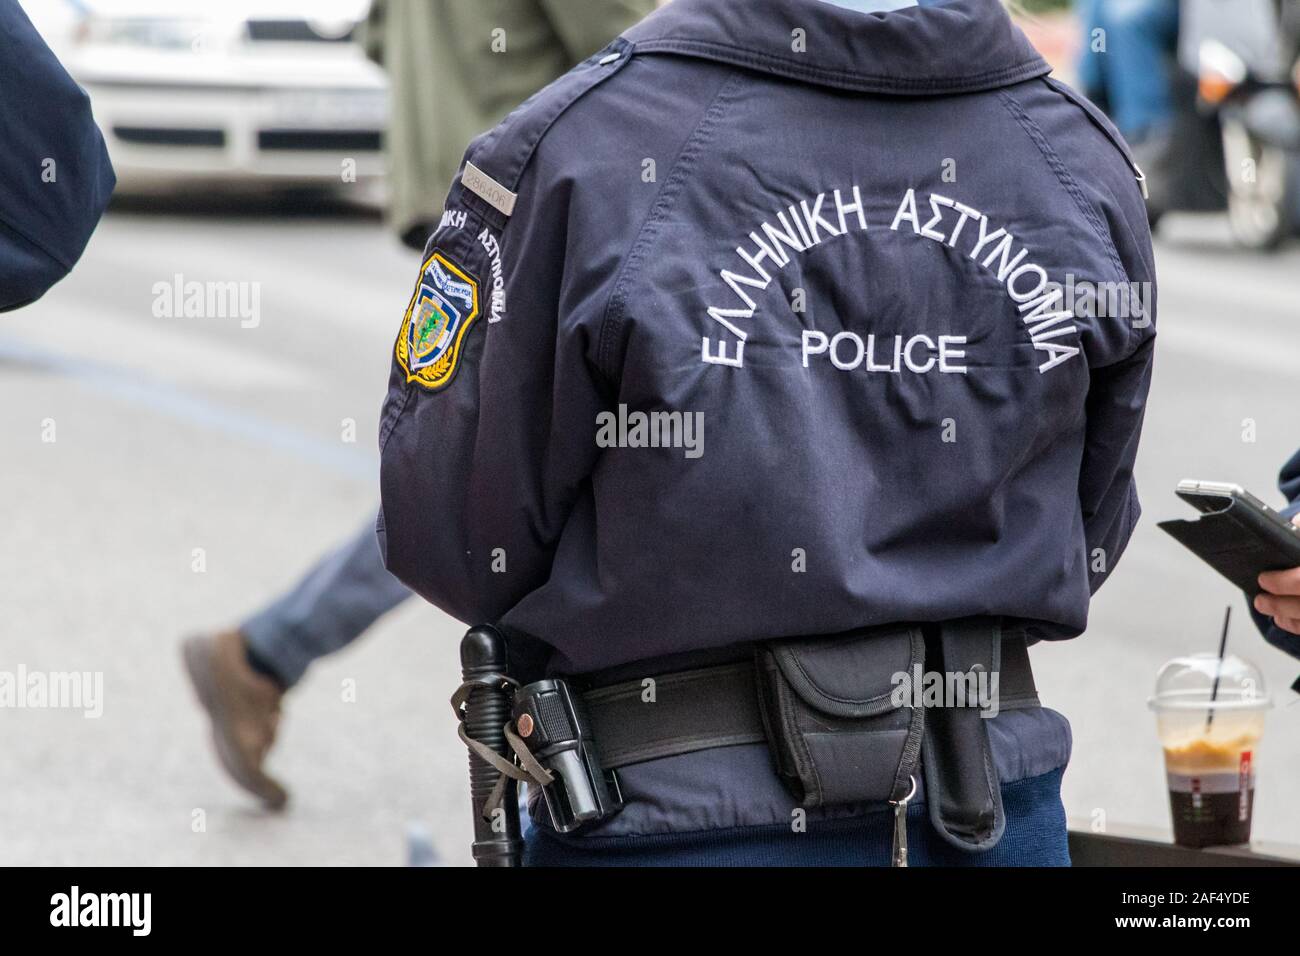 Astynomia police sign-logo on the back of a police uniform standing outdoors. Stock Photo